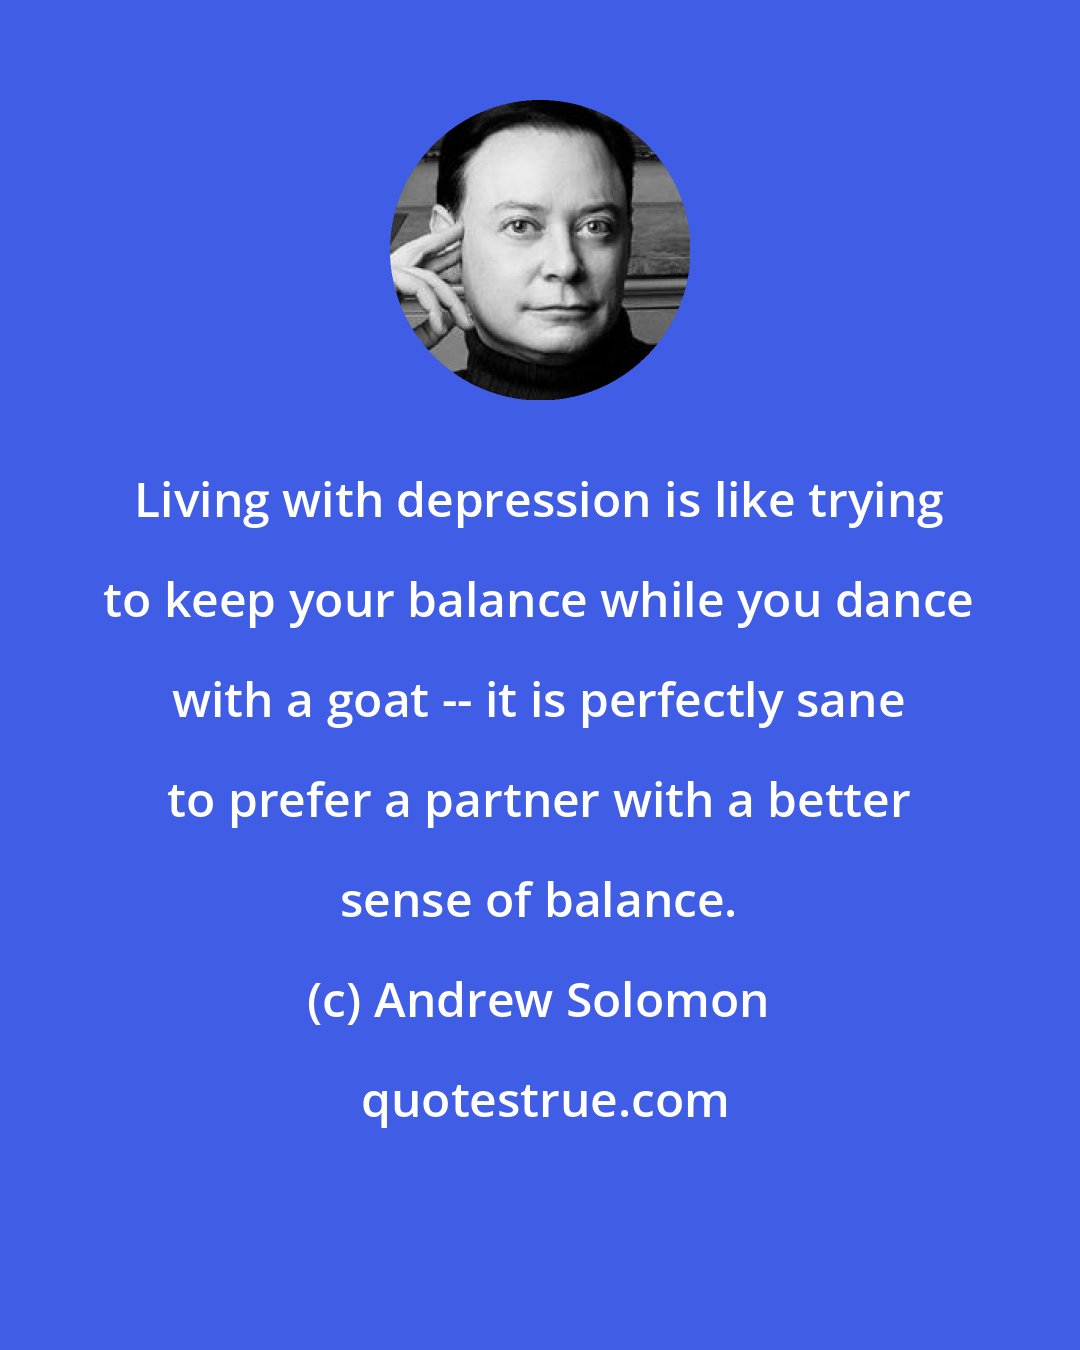 Andrew Solomon: Living with depression is like trying to keep your balance while you dance with a goat -- it is perfectly sane to prefer a partner with a better sense of balance.